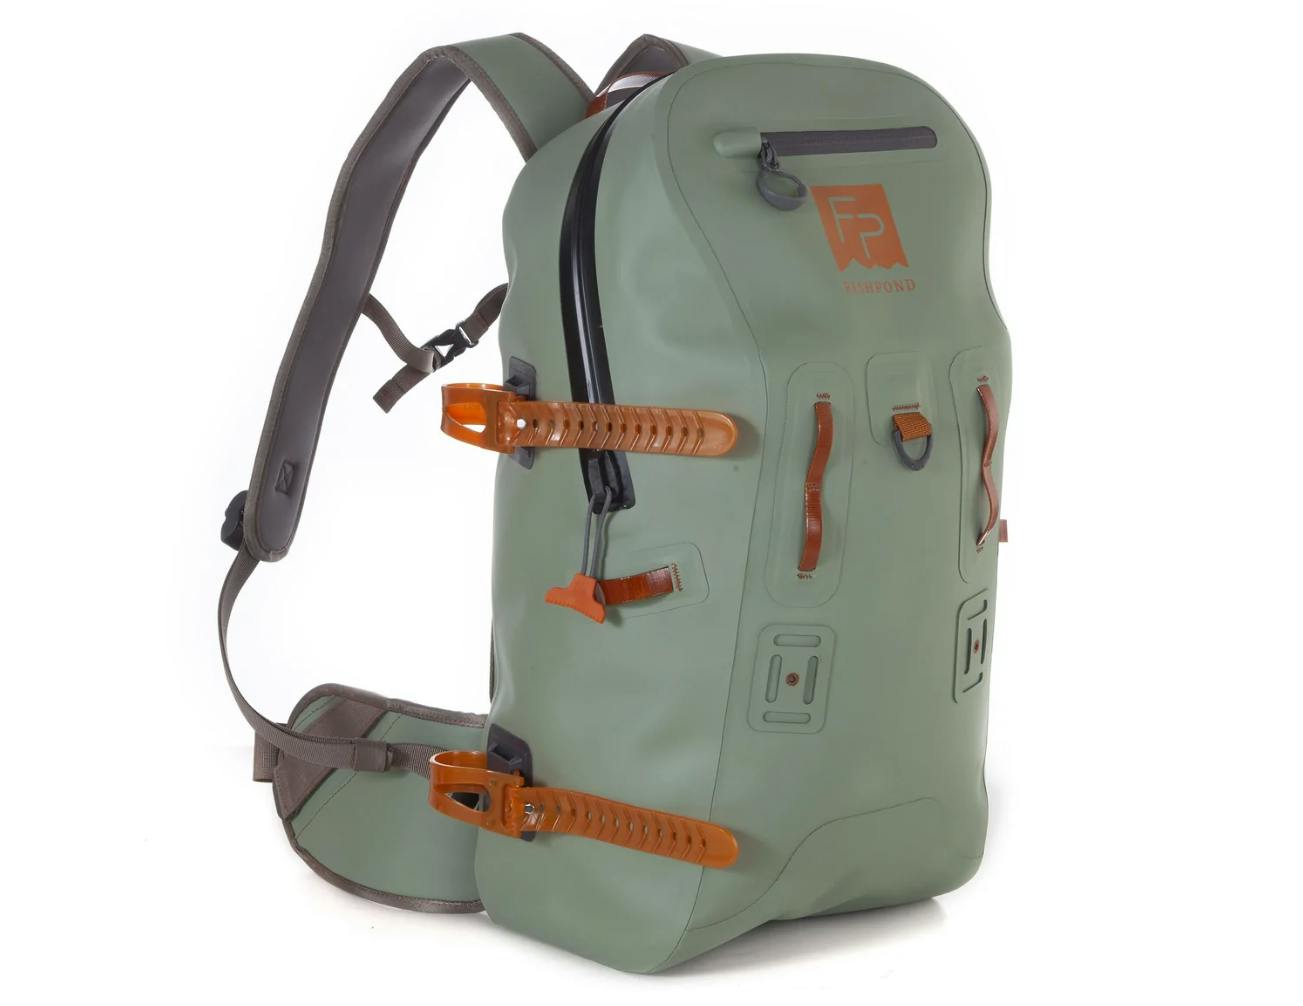 fishpond Cross-Current Fly Fishing Chest Pack, Tackle Storage